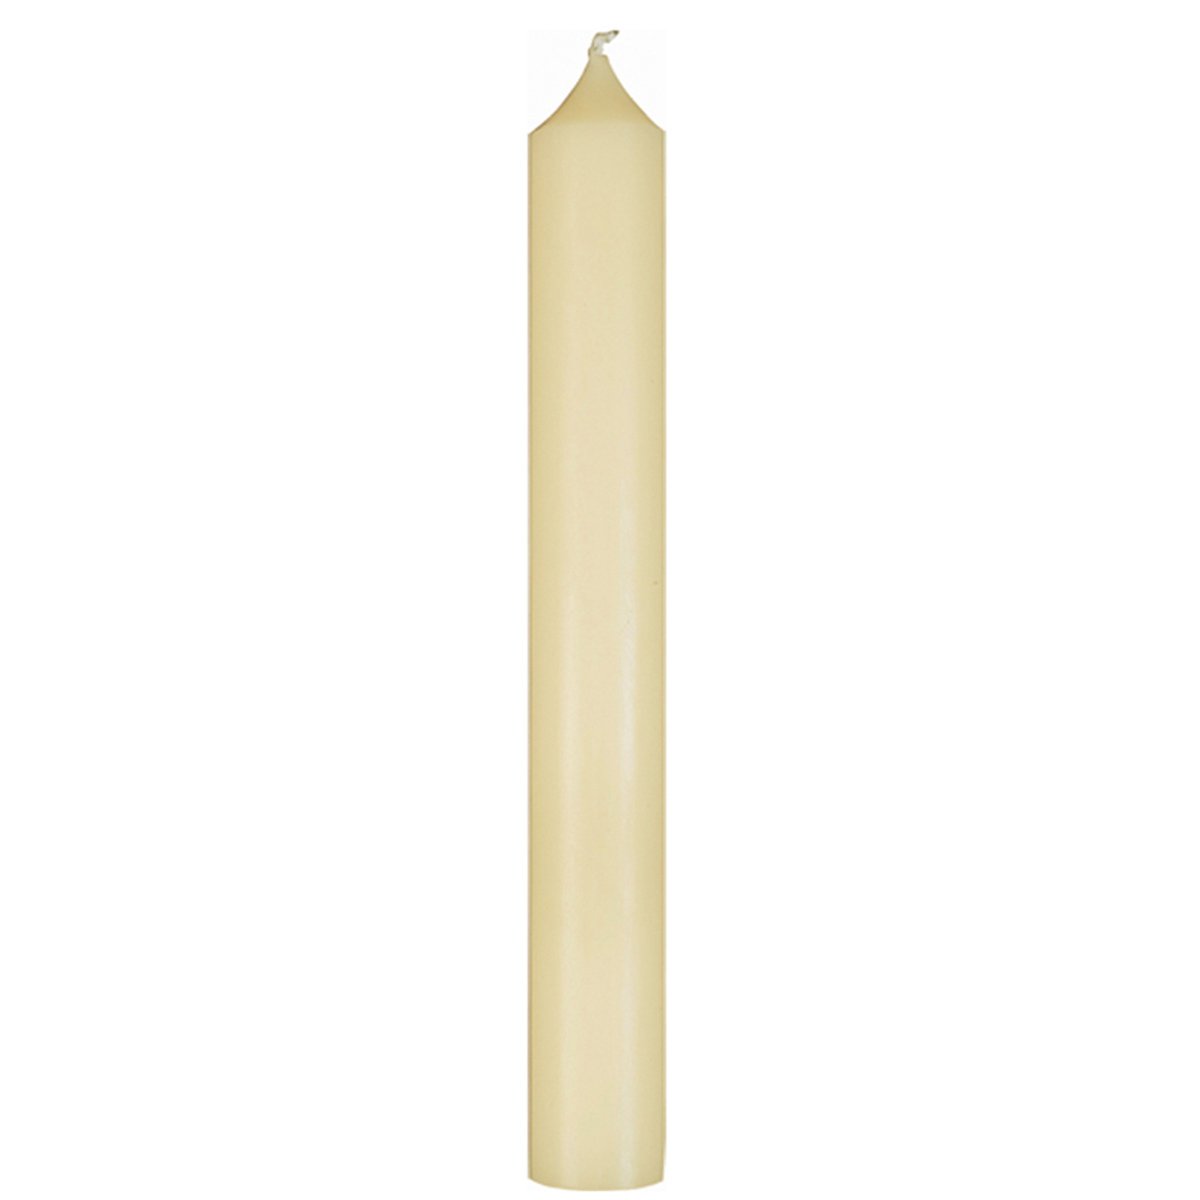 Root Spring Tube Candle 51% Beeswax 1 1/2″ x 6″ 24/Bx Plain End